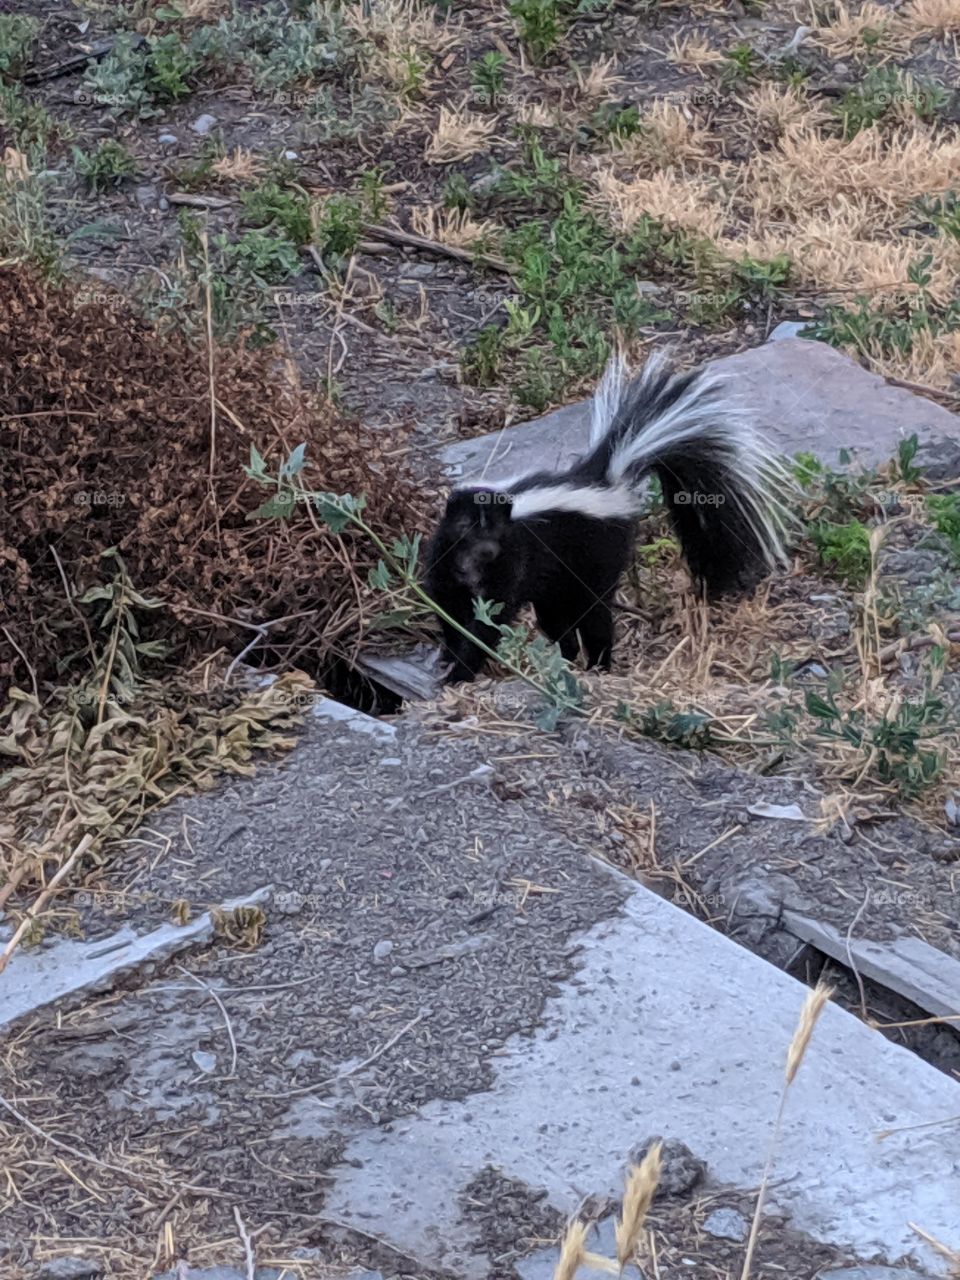 skunk smelling branches before hiding in the place it calls home. it shortly after slipped into the cracks you can see in the picture.